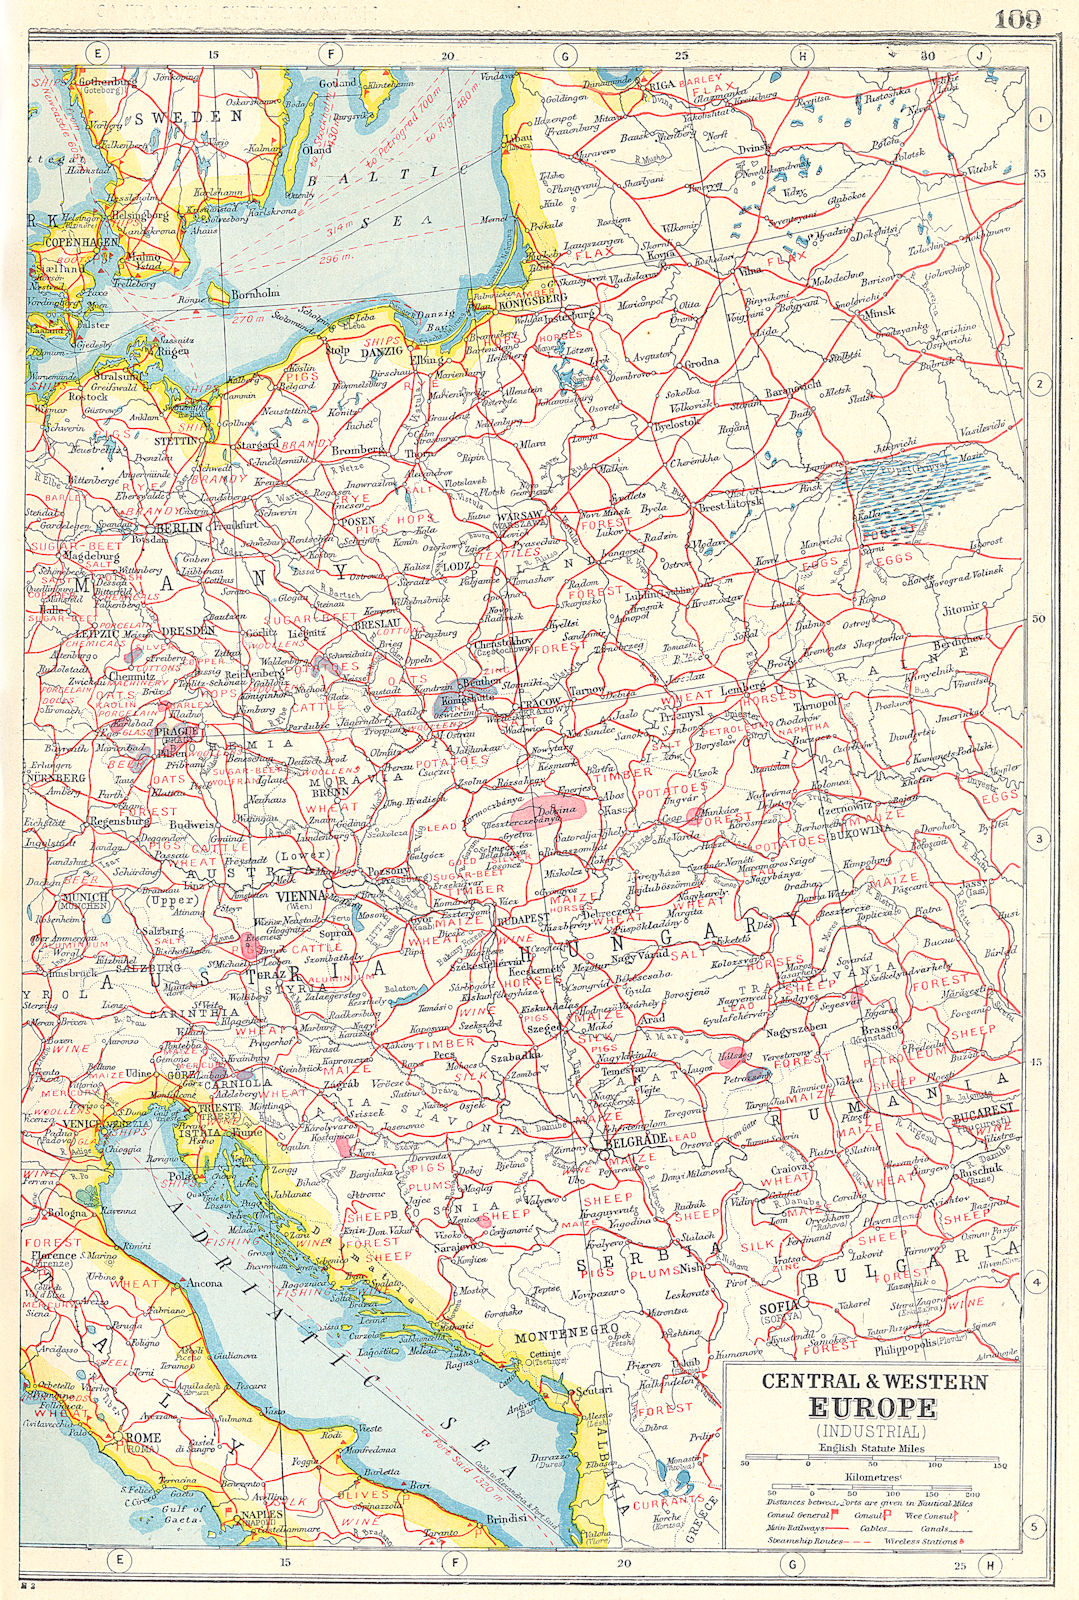 EAST EUROPE AGRICULTURAL/INDUSTRIAL.Products.Austria Hungary Germany 1920 map